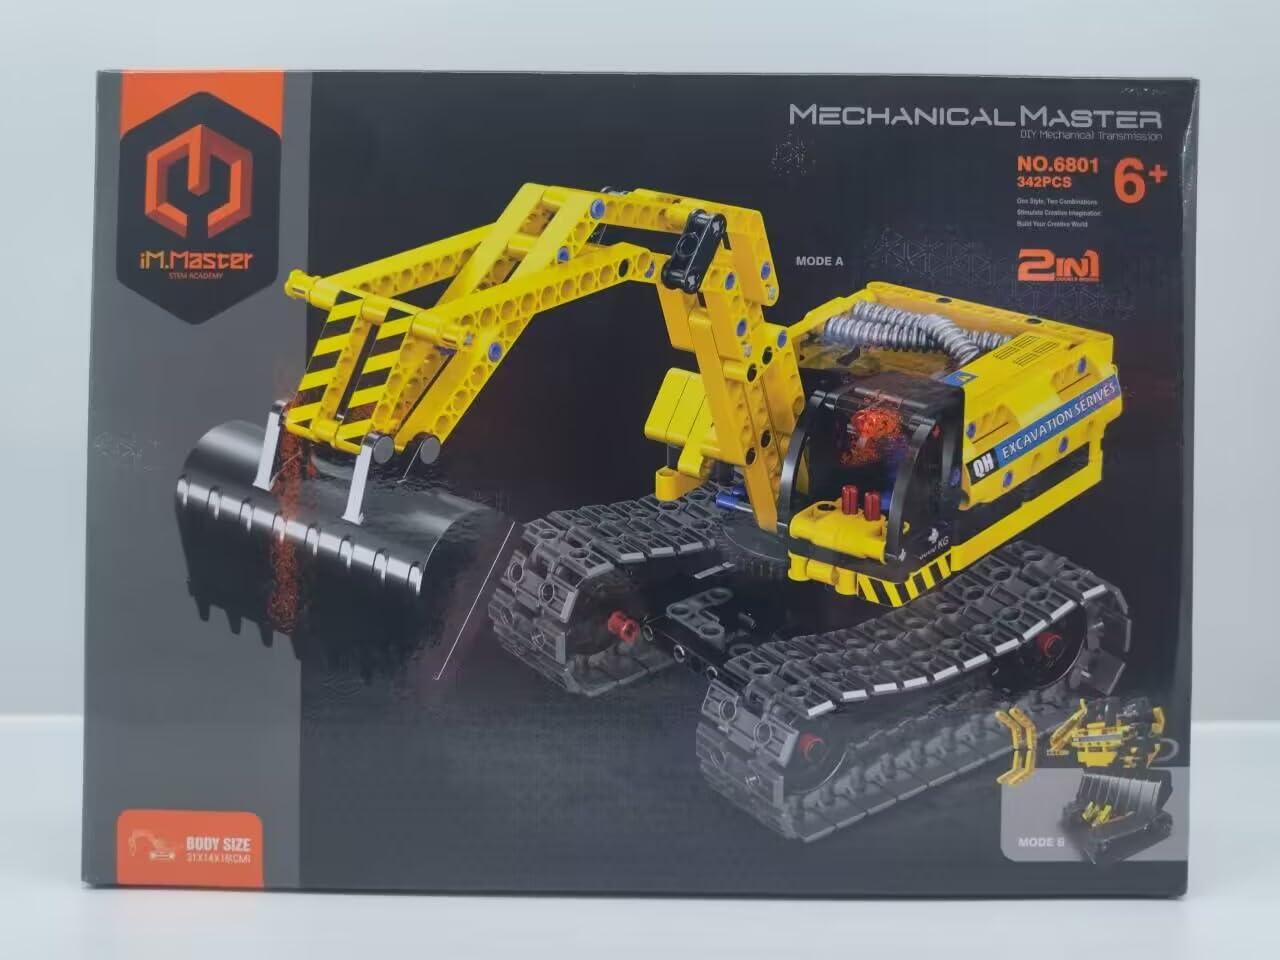 OKKIDY Building Toys Sets Excavators Robot 2-in-1, Technic Building Blocks, 342 PCS STEM Building Blocks Crane Toy Crawler Excavator & Robot Gift for Children 6 7 8 9 10 Years Old 2